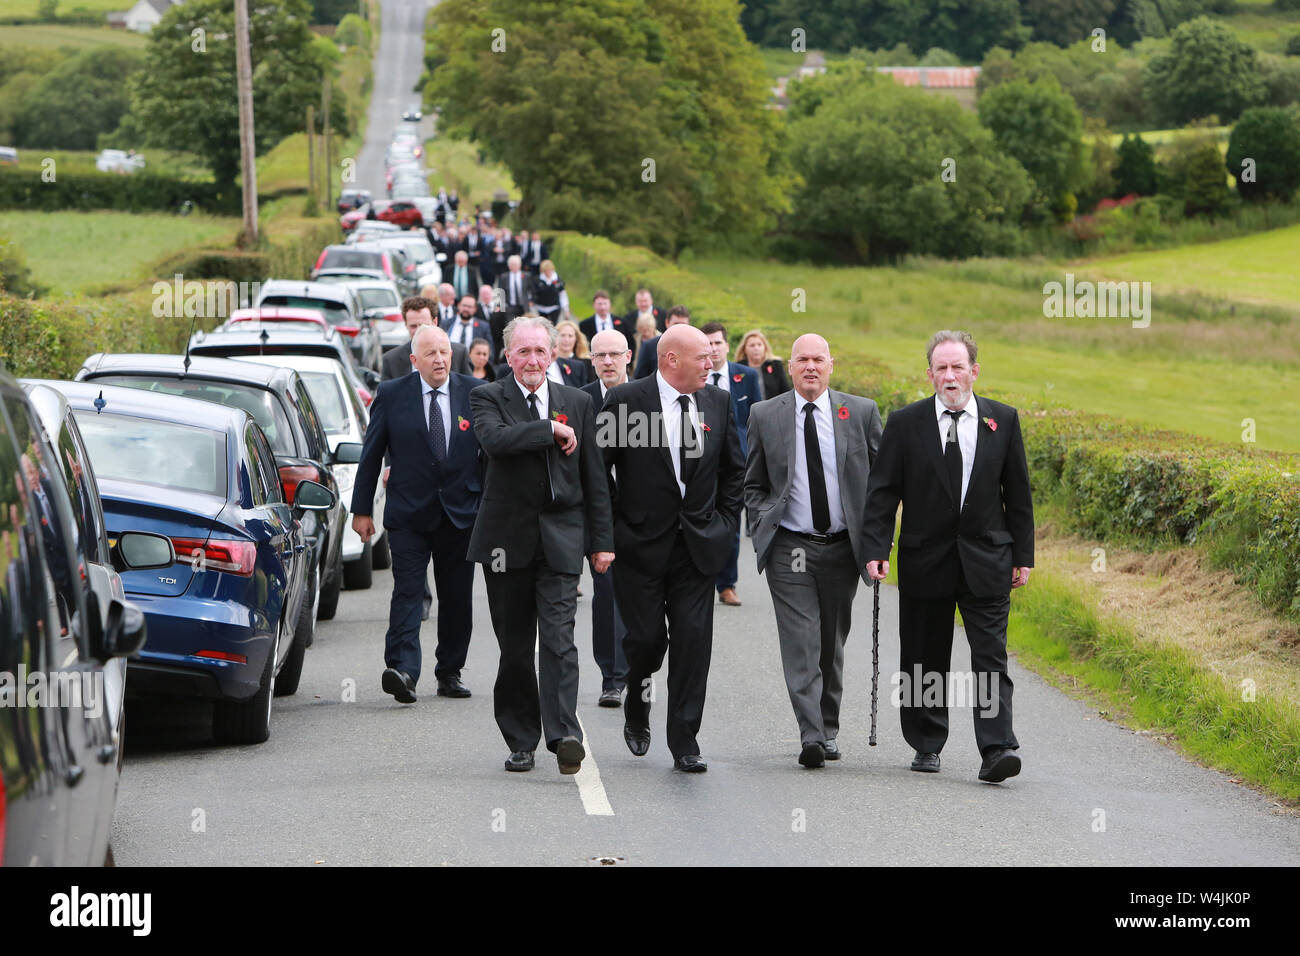 People arrives for the funeral of Willie Frazer at Five Mile Hill Full Gospel Fellowship Church on the Maytown Road, County Armagh, Monday July 1st, 2019. (Photo by Paul McErlane for the Belfast Telegraph) Stock Photo